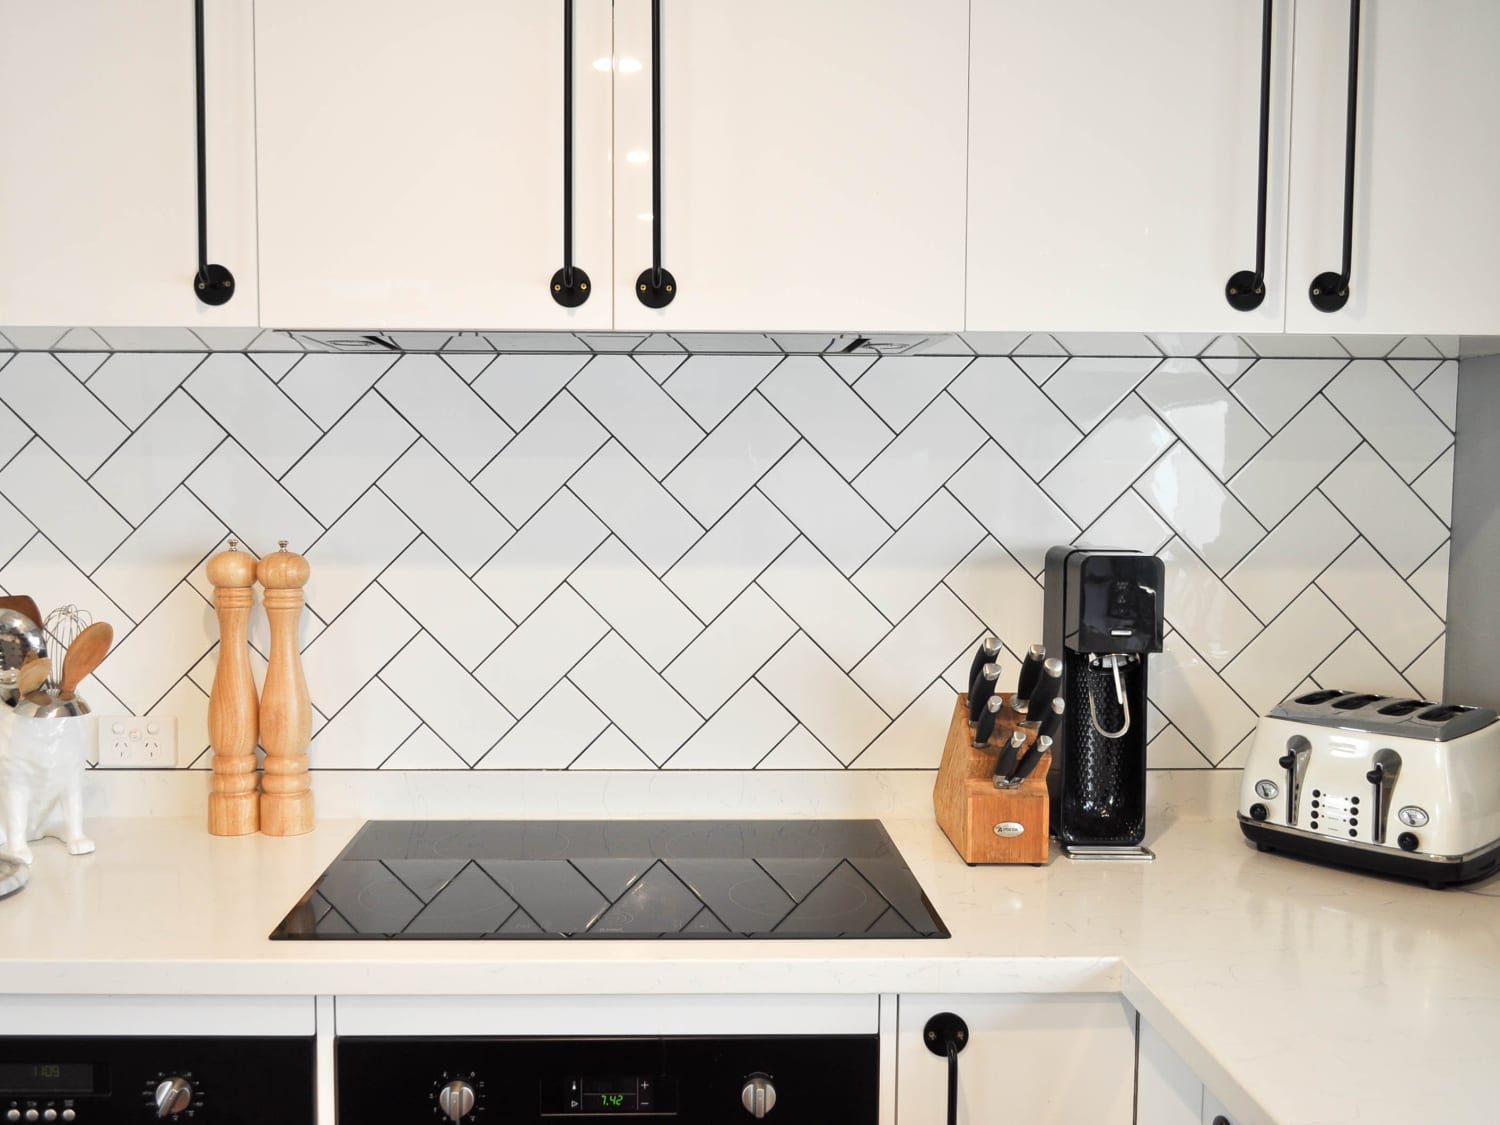 How to clean tile grout with this viral grout-cleaning hack from TikTok